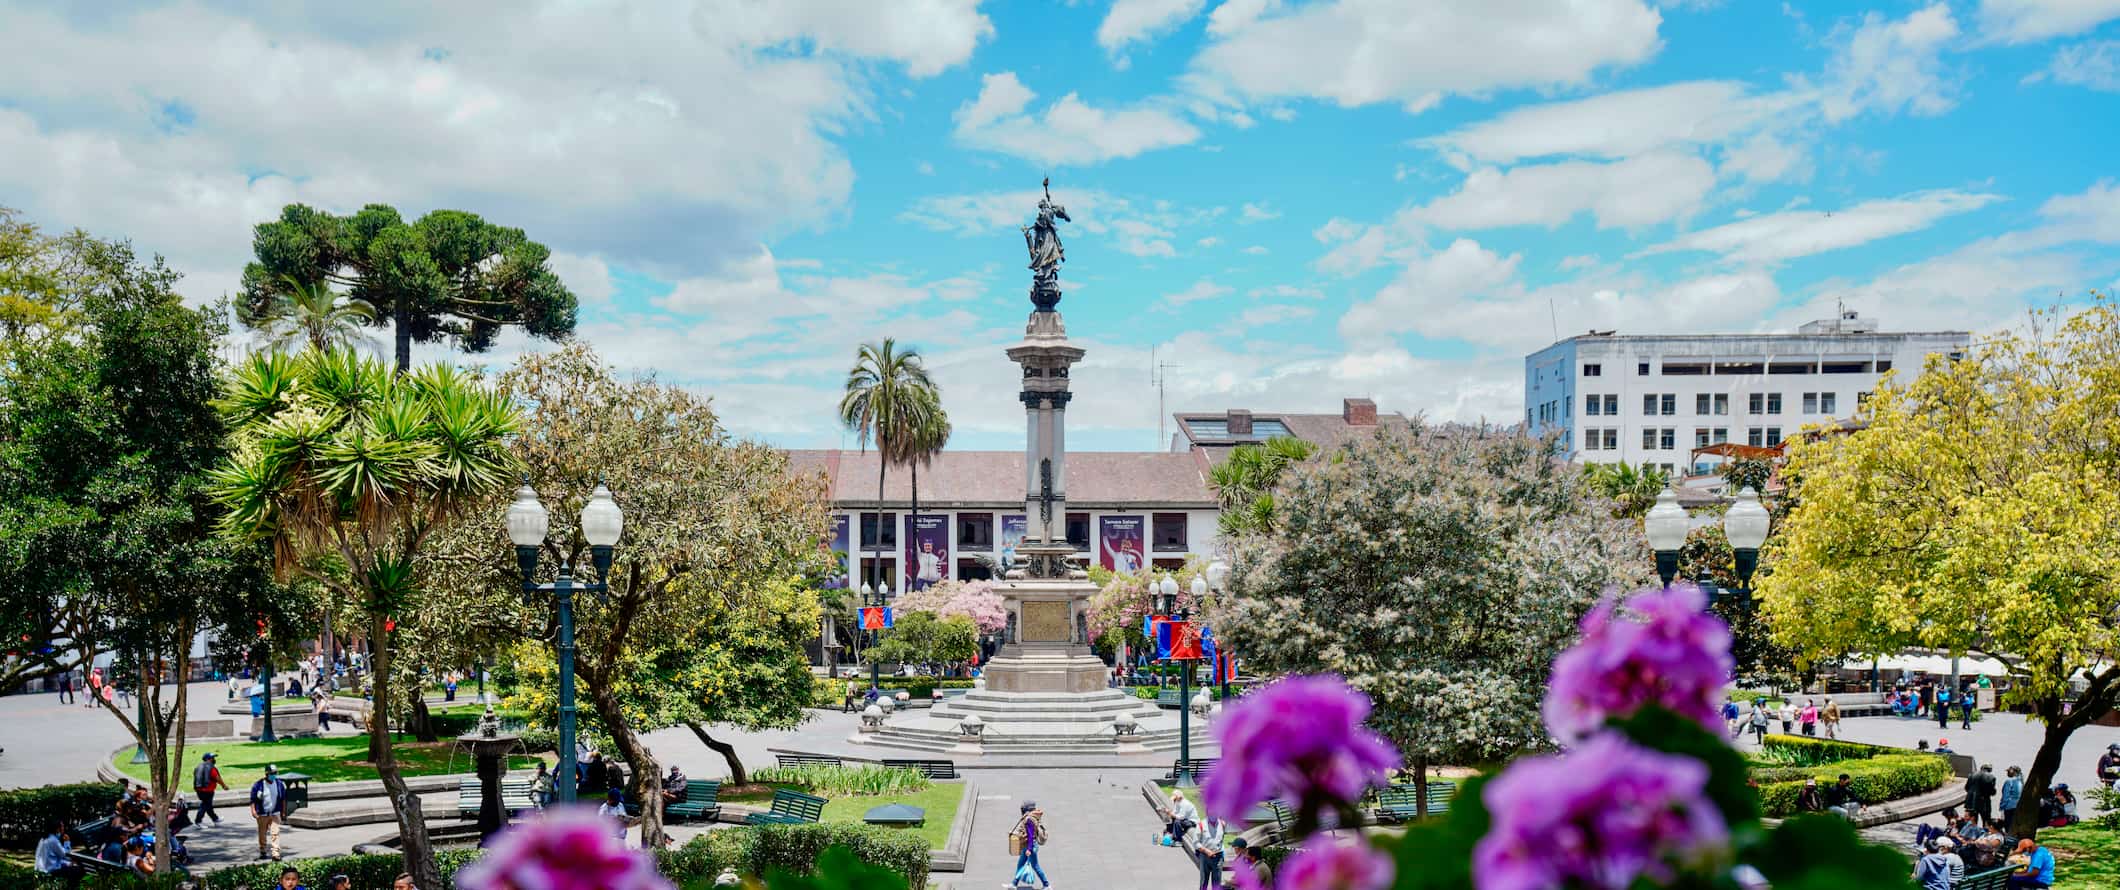 Colorful flowers near a square with a statue and fountain in sunny Quito, Ecuador